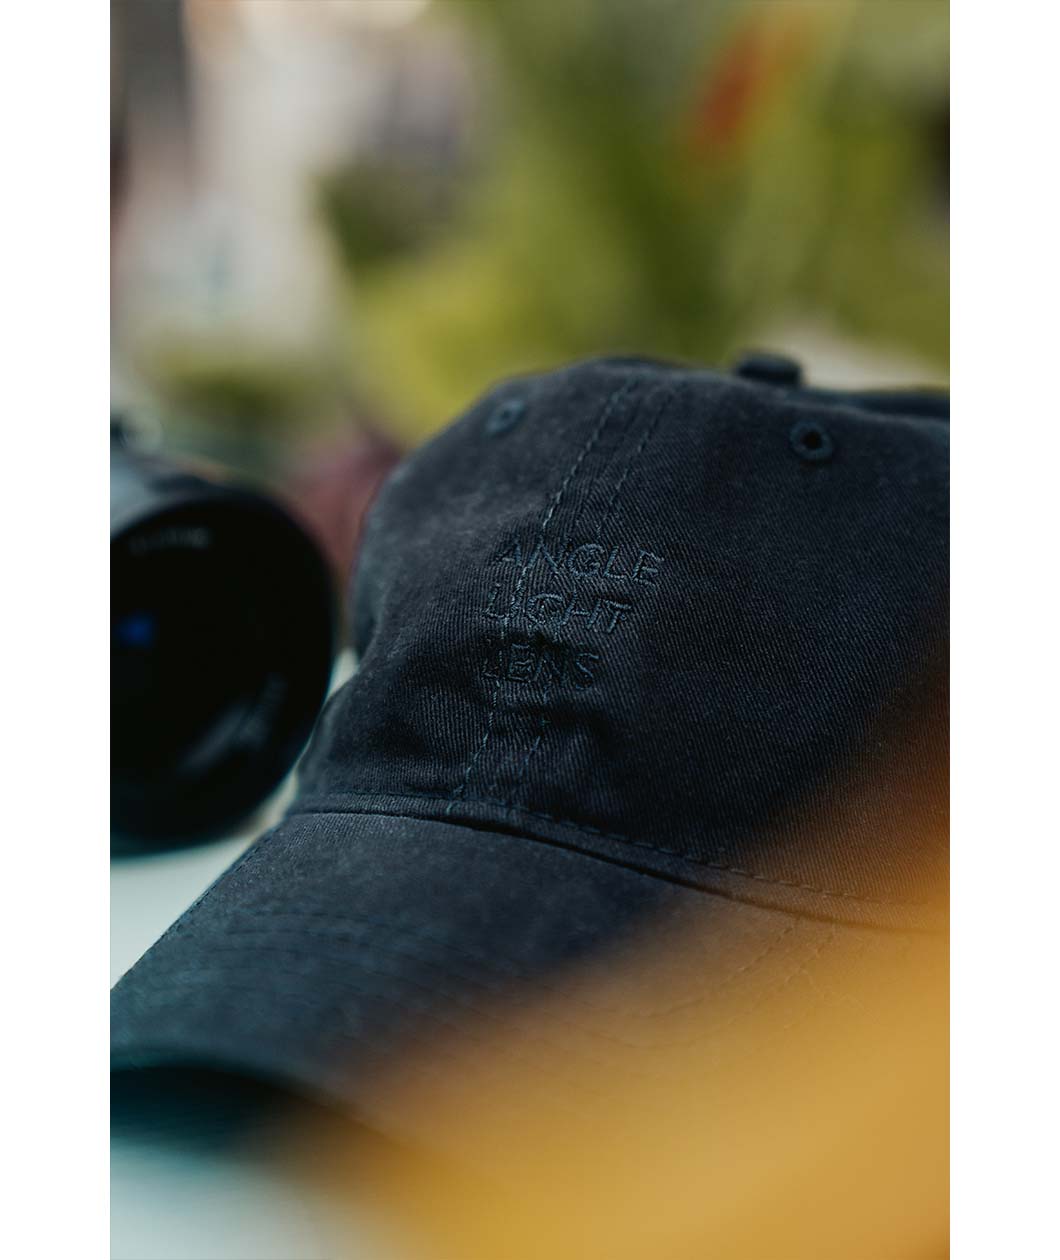 A close up of a black hat embroidered with "Angle Light Lens" sits on a table with a camera next to it.